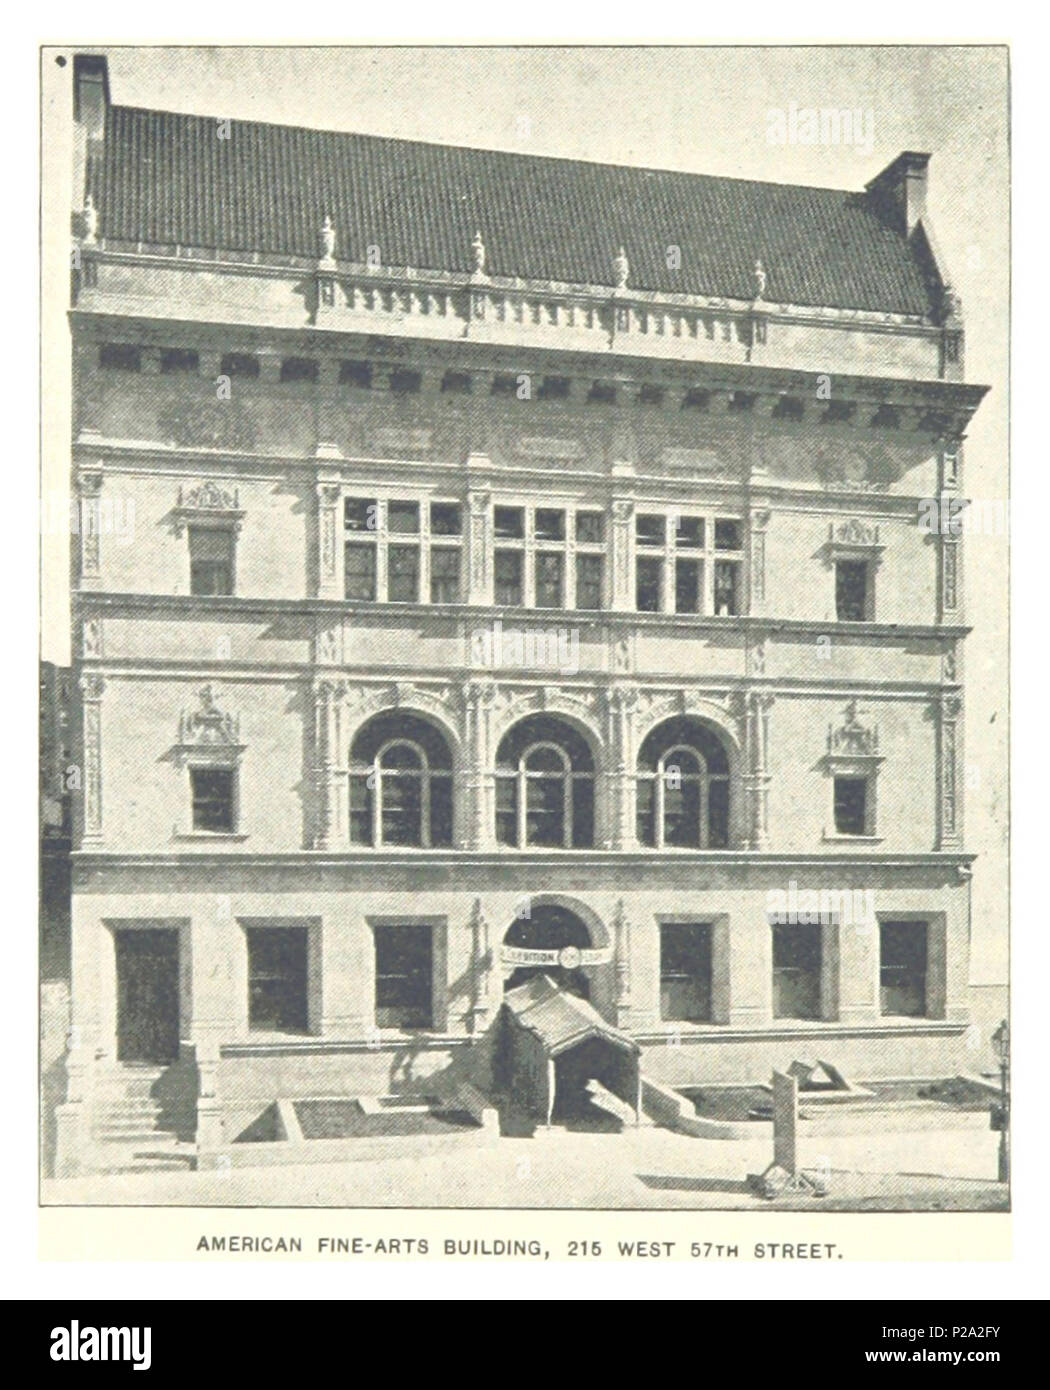 (King1893NYC) pg316 AMERICAN FINE ART BUILDING, 215 WEST 57TH STREET. Banque D'Images